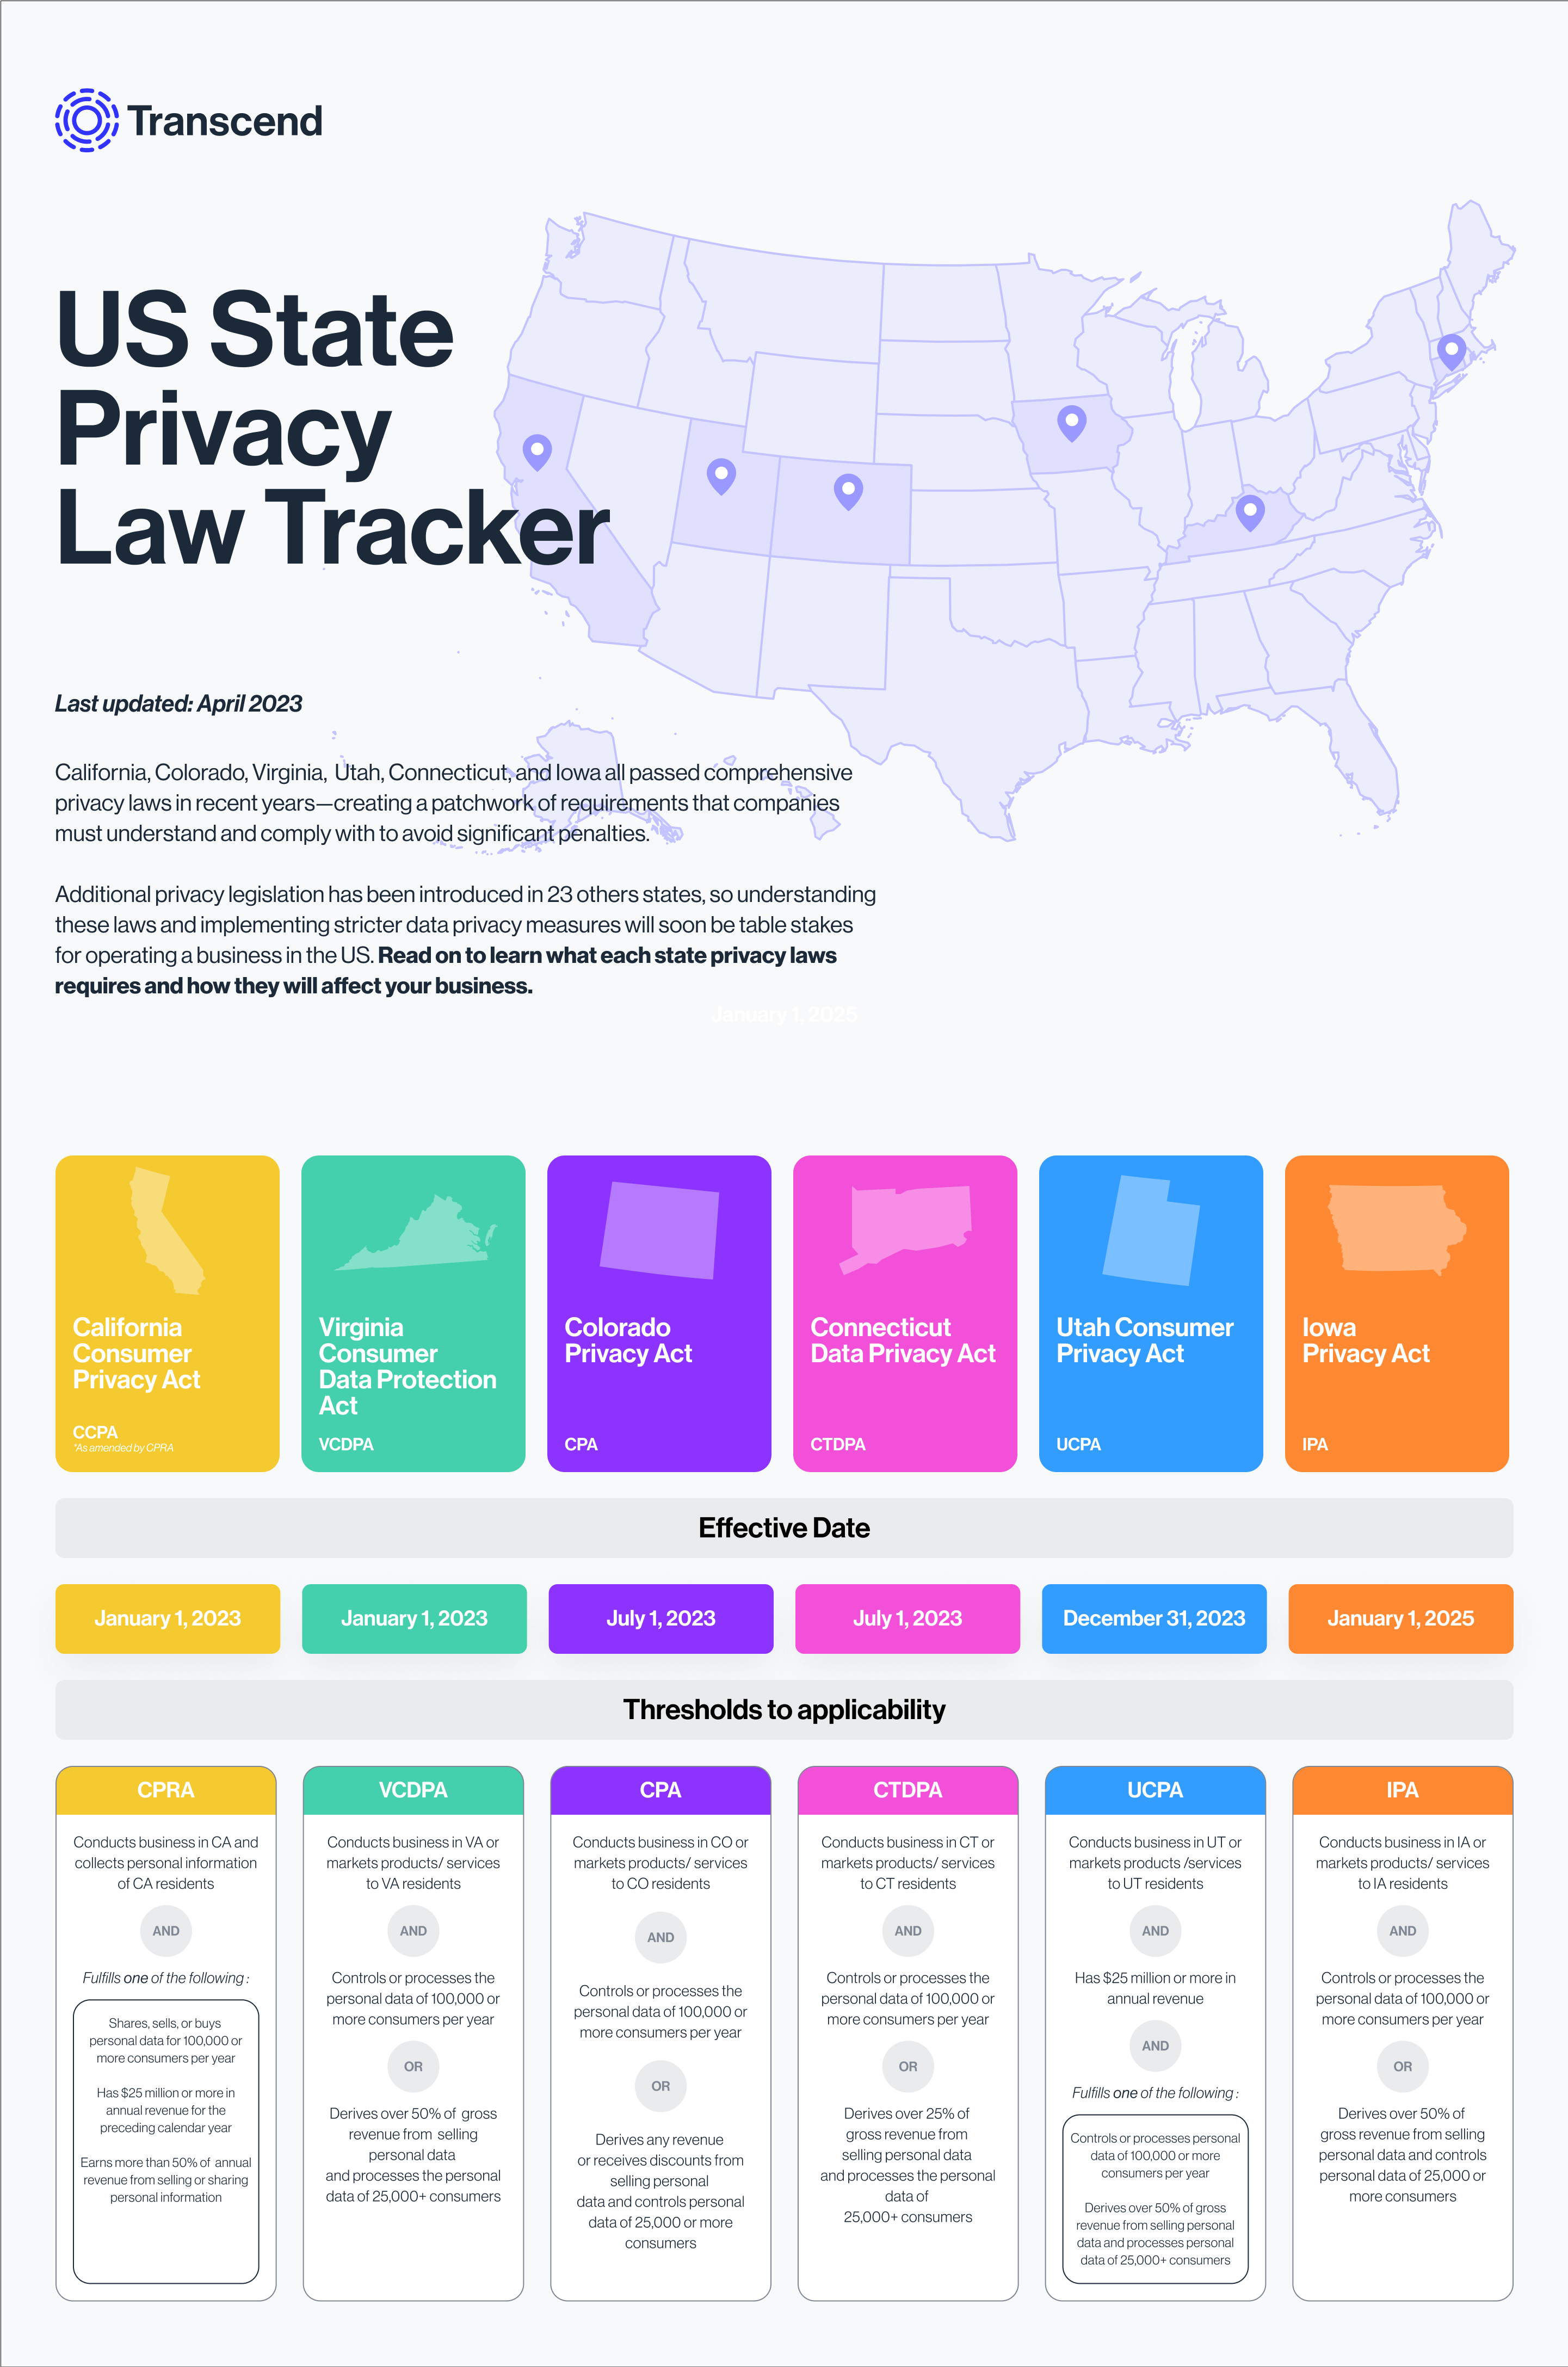 US state law tracker infographic focusing on network management and IT support.